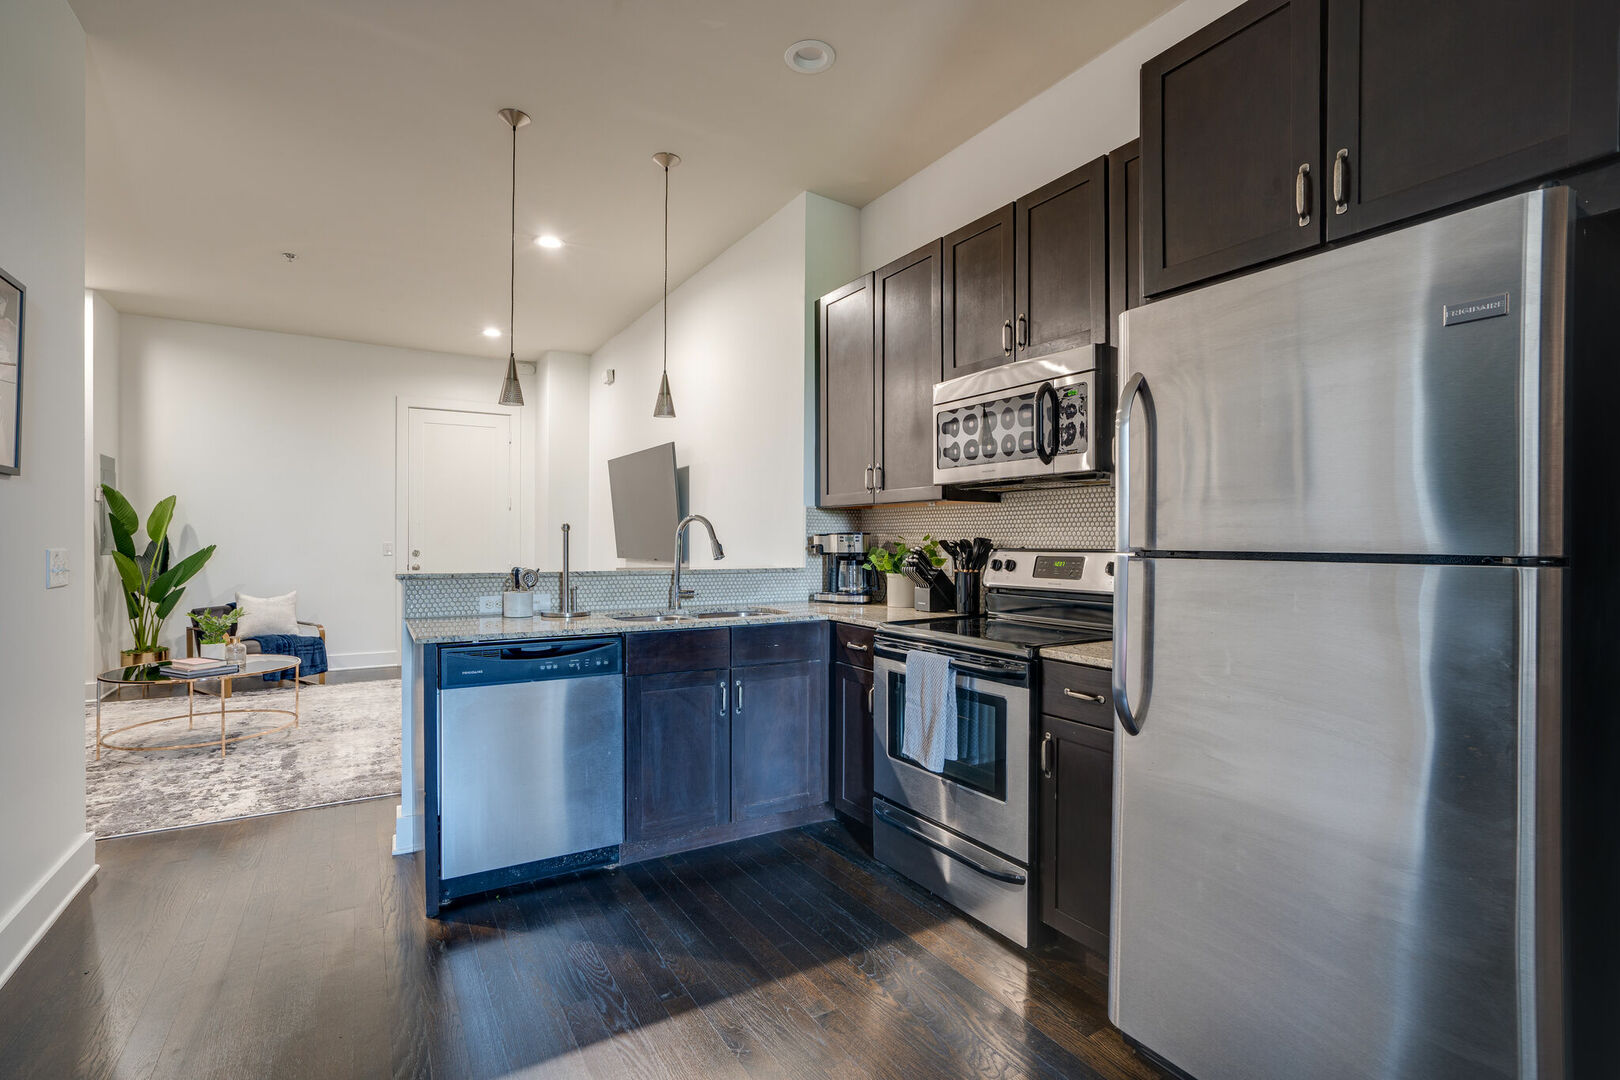 Fully equipped kitchen stocked with your basic cooking essentials. Complete with granite counter tops, stainless steel appliances, and breakfast bar seating.